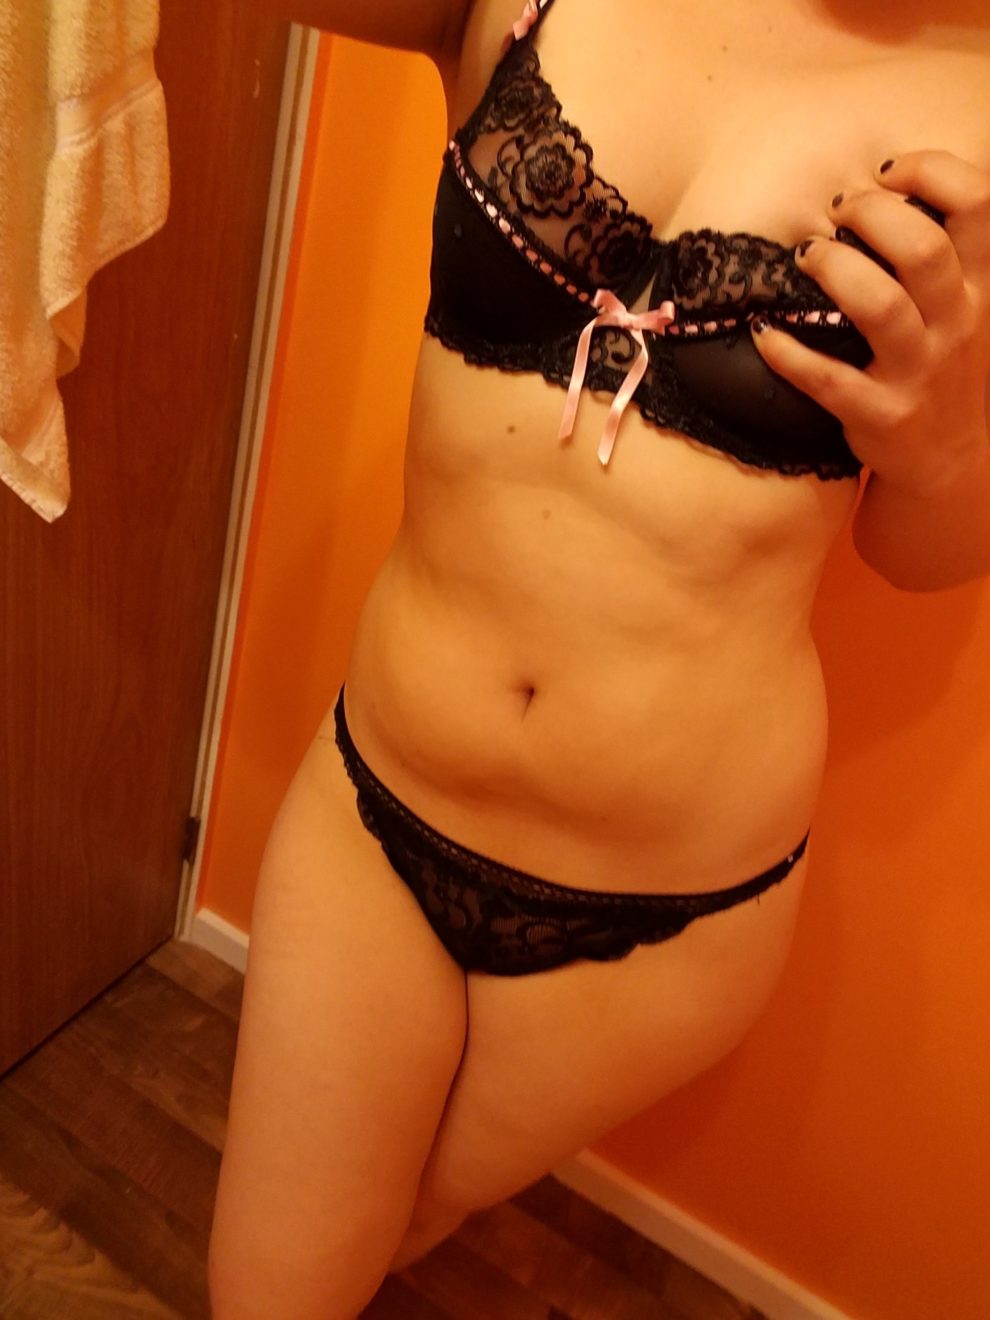 Come and rip this bra of(f) of me and ravage me.